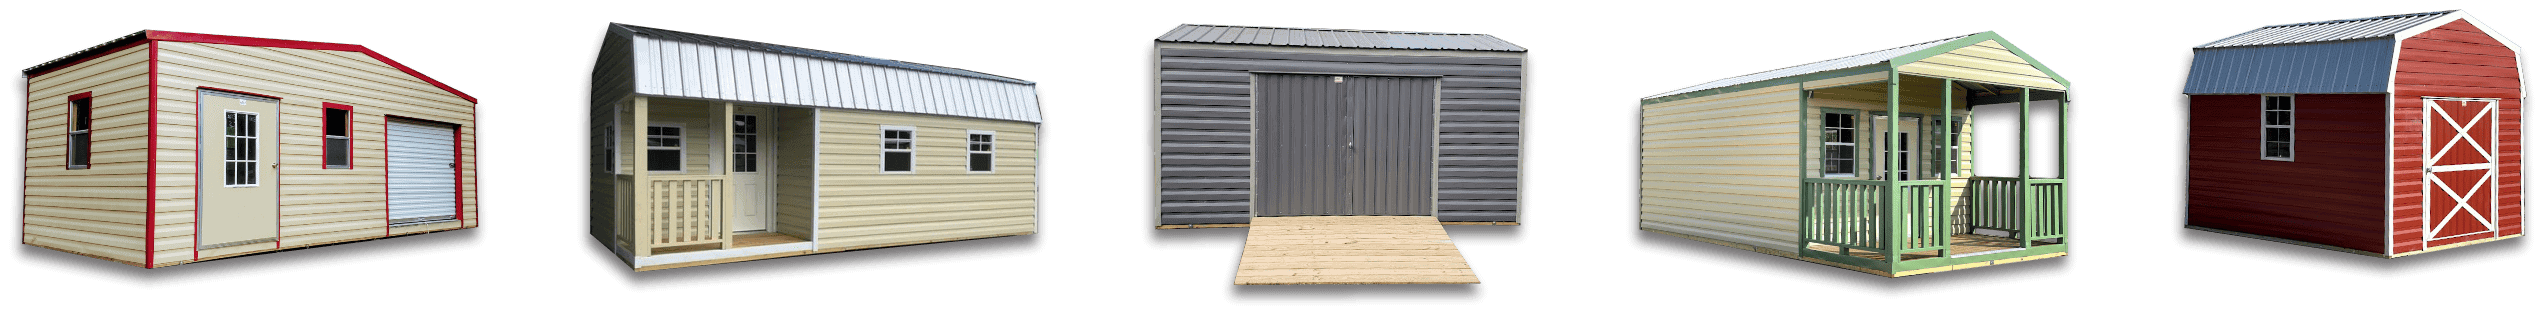 Find high-quality 8x12 sheds for sale at RobinSheds.com - Your top destination for 8x12 portable buildings, storage sheds, and outdoor storage buildings. Shop now and discover a variety of 8x12 shed styles from your trusted dealer.